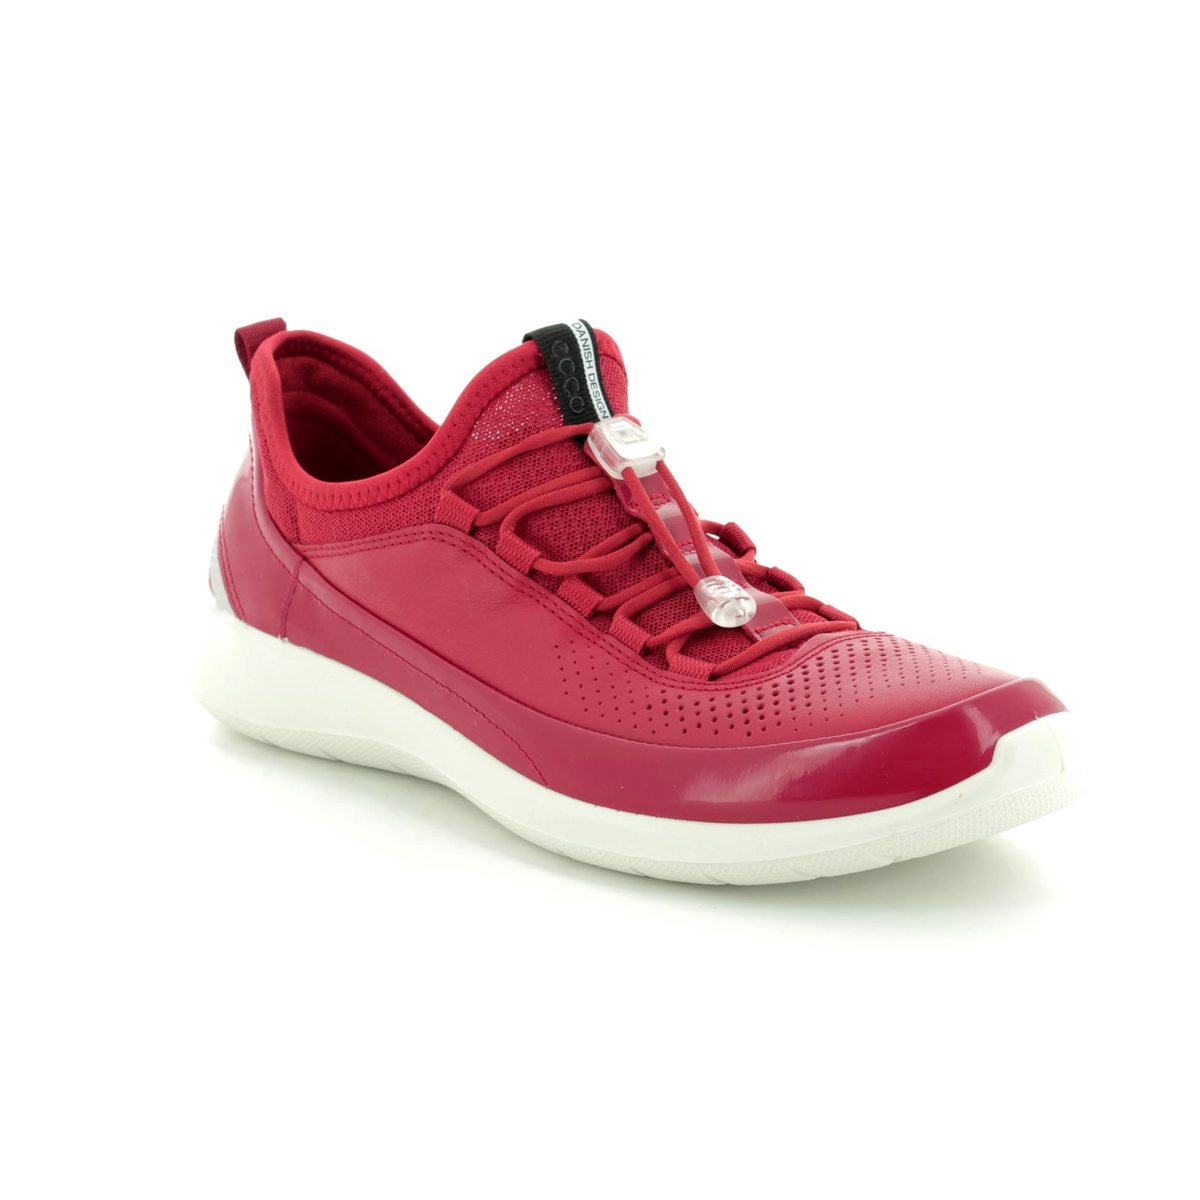 ECCO Soft 5 283013-50900 Red Trainers